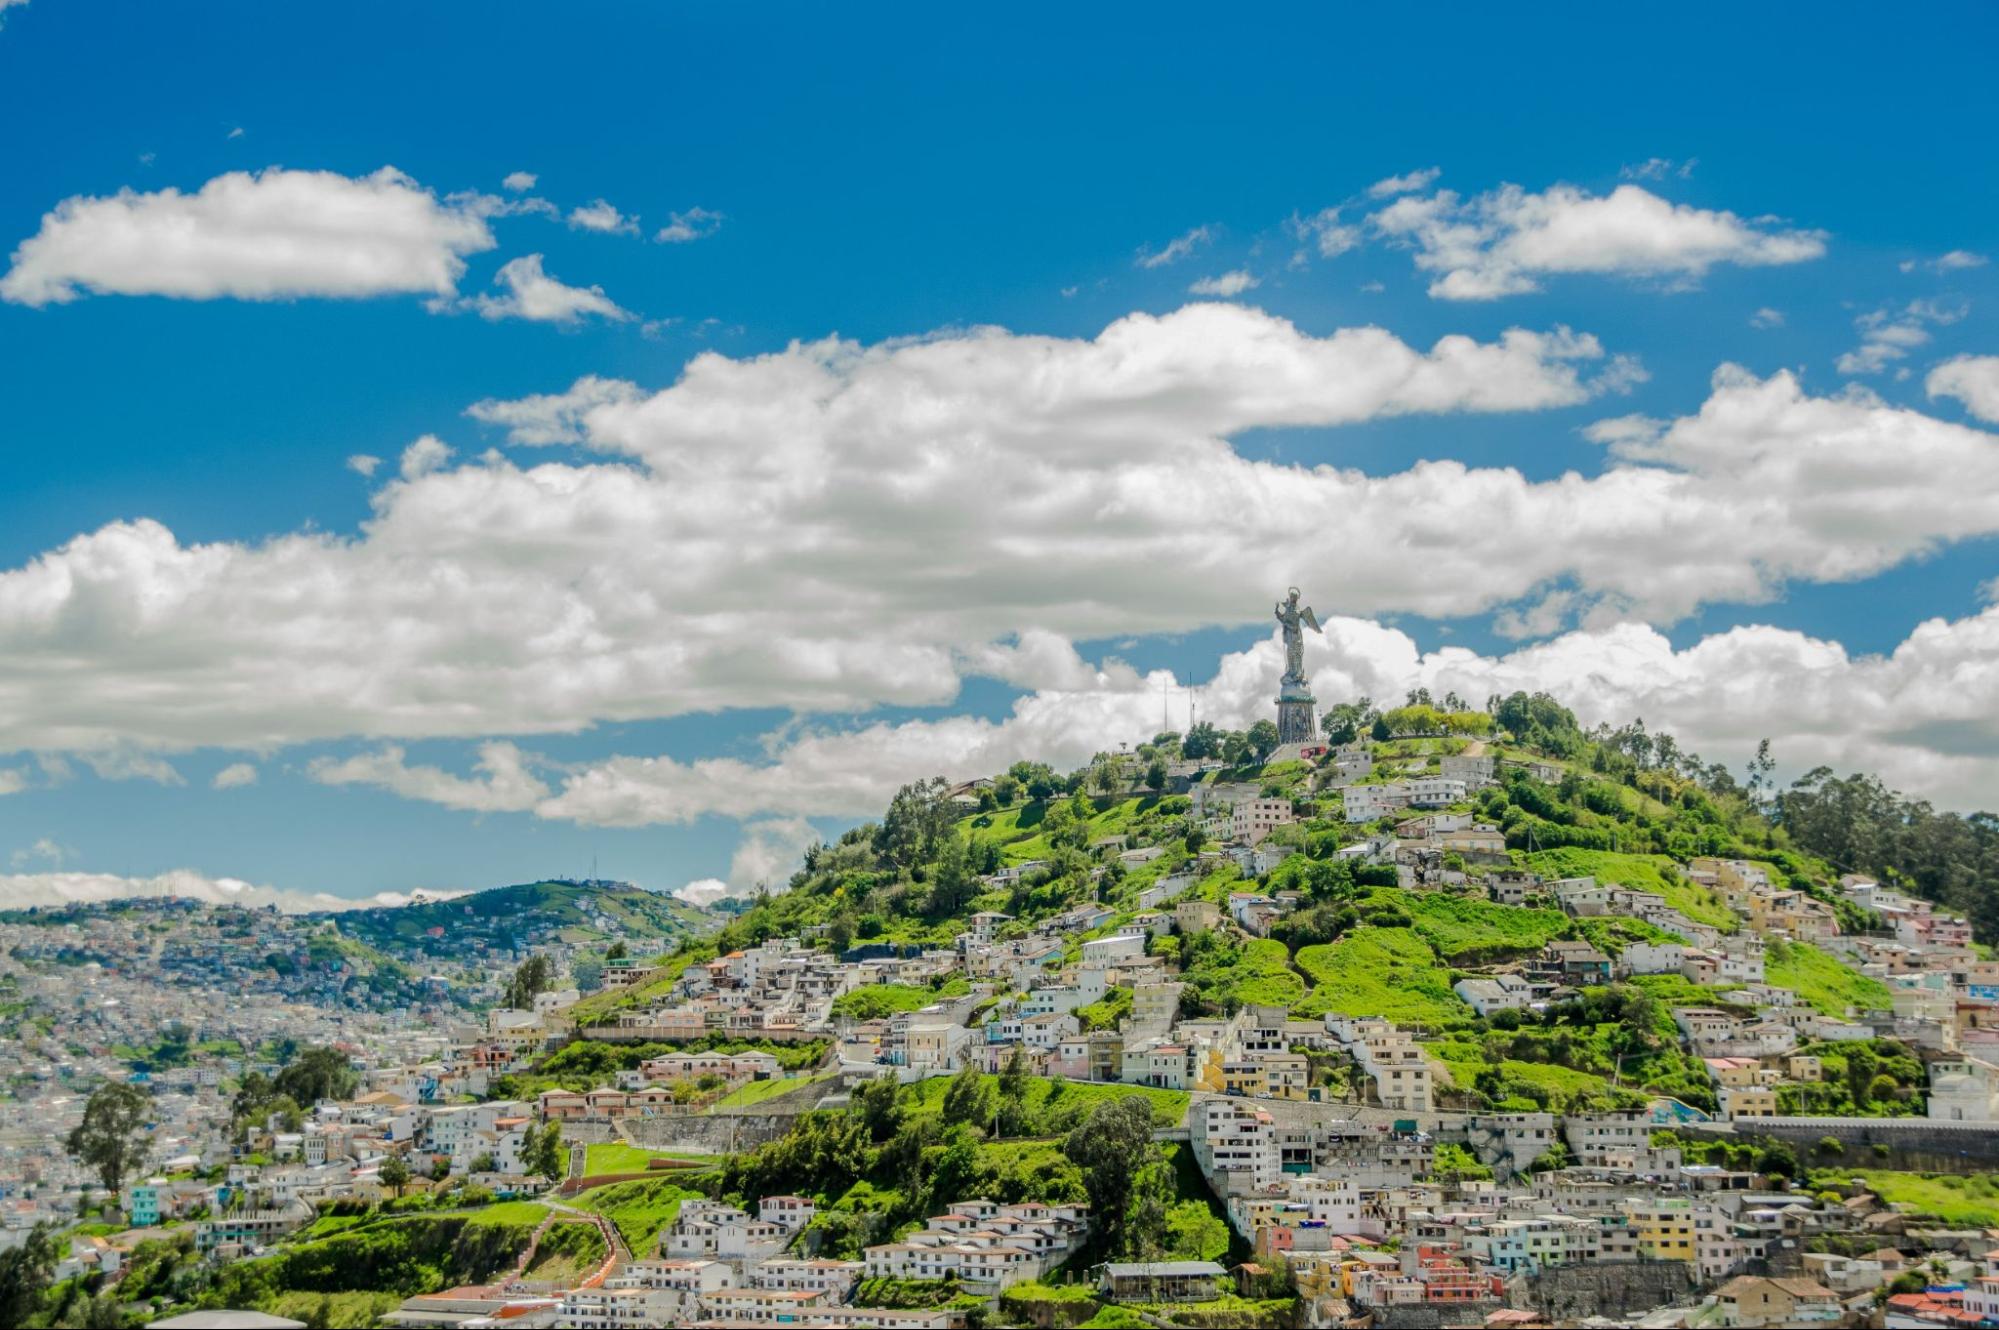 High view of the city of Quito and some buildings, with Panecillo hill in the top of the mountain